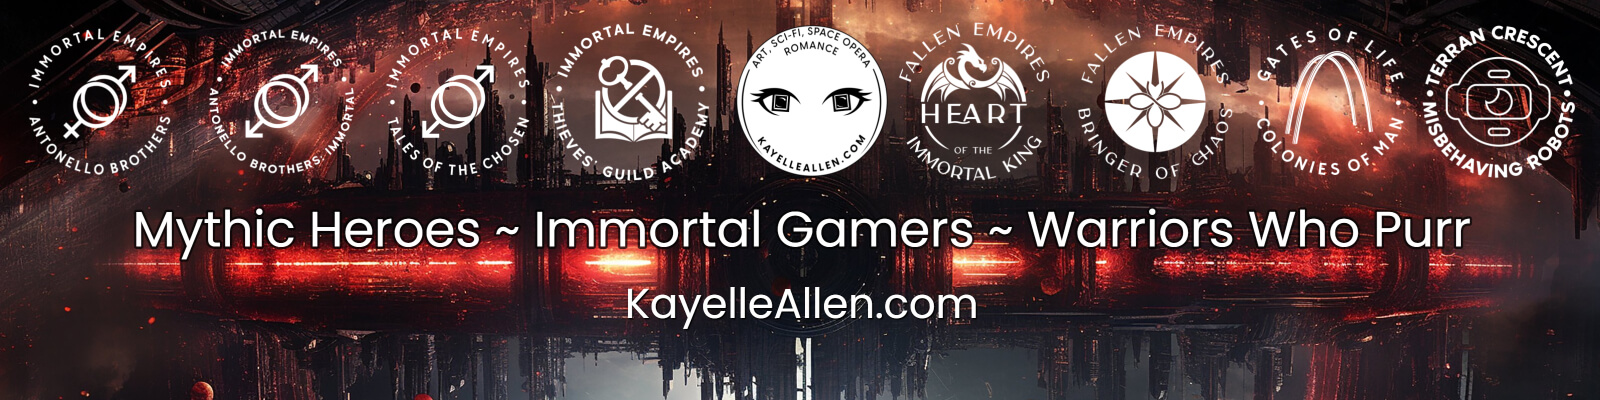 Kayelle Allen - writing MM Sci-Fi Romance with mythic heroes, immortal gamers, and warriors who purr.